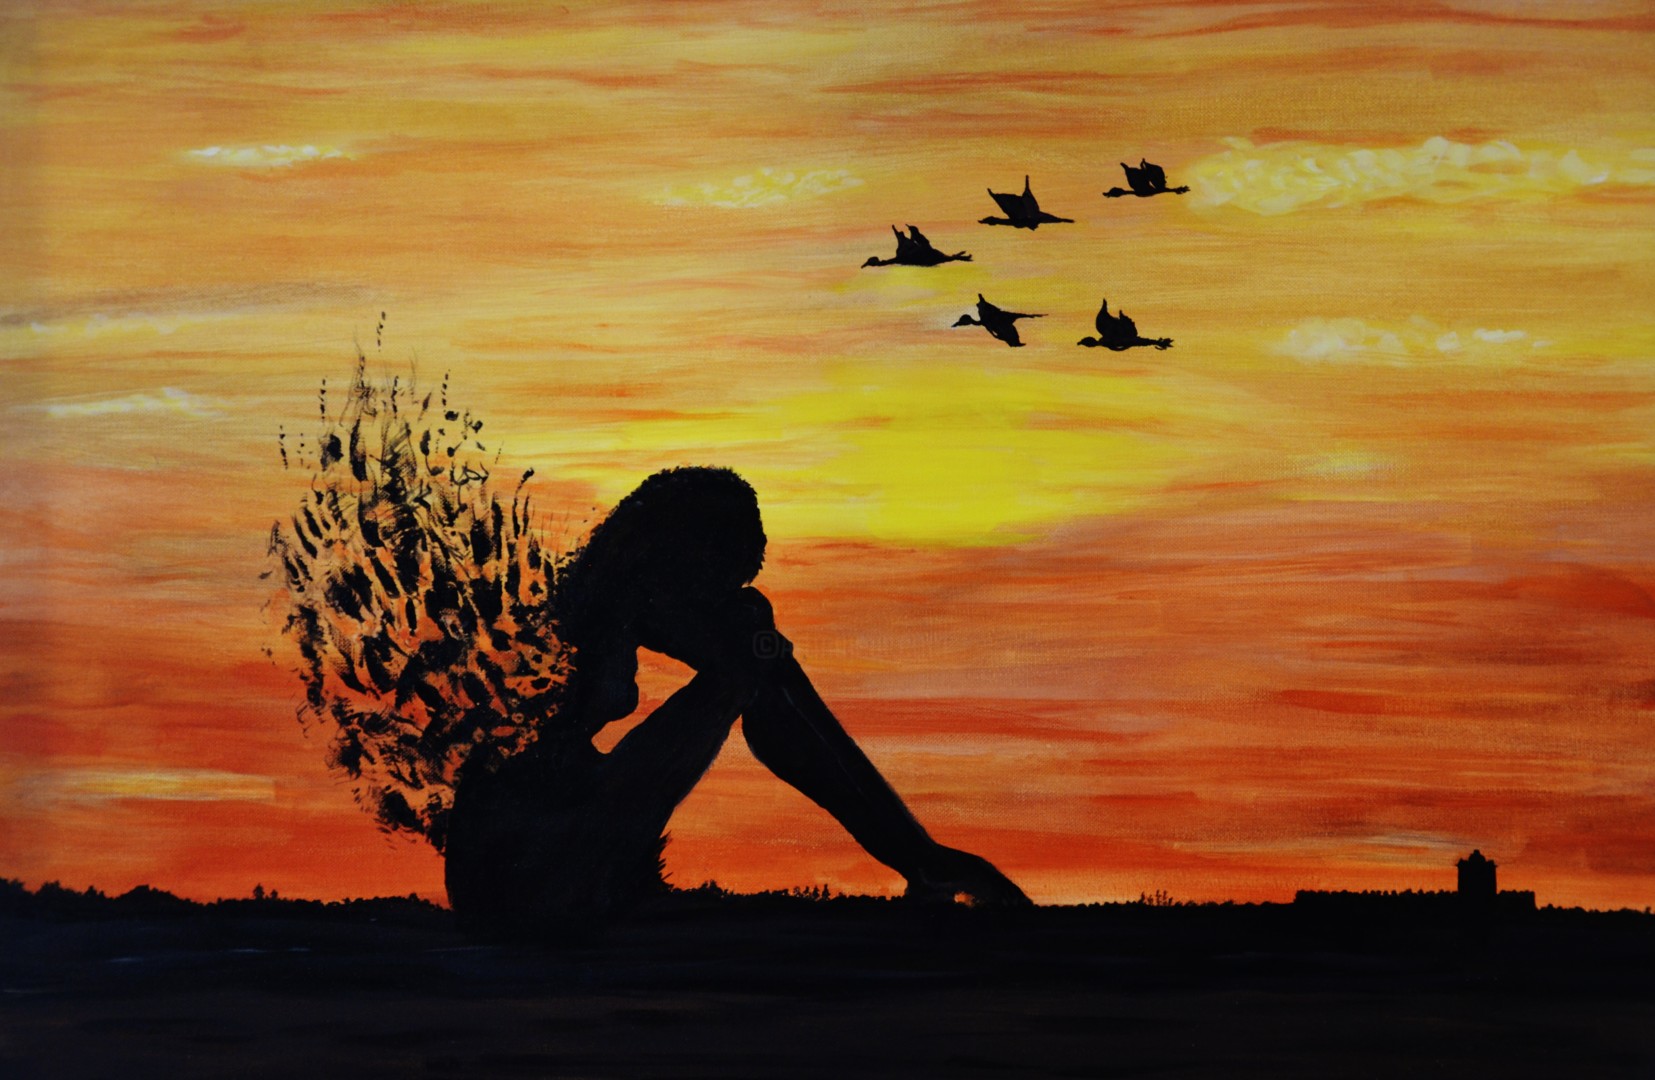 Freedom, Painting by Expressions   Artmajeur